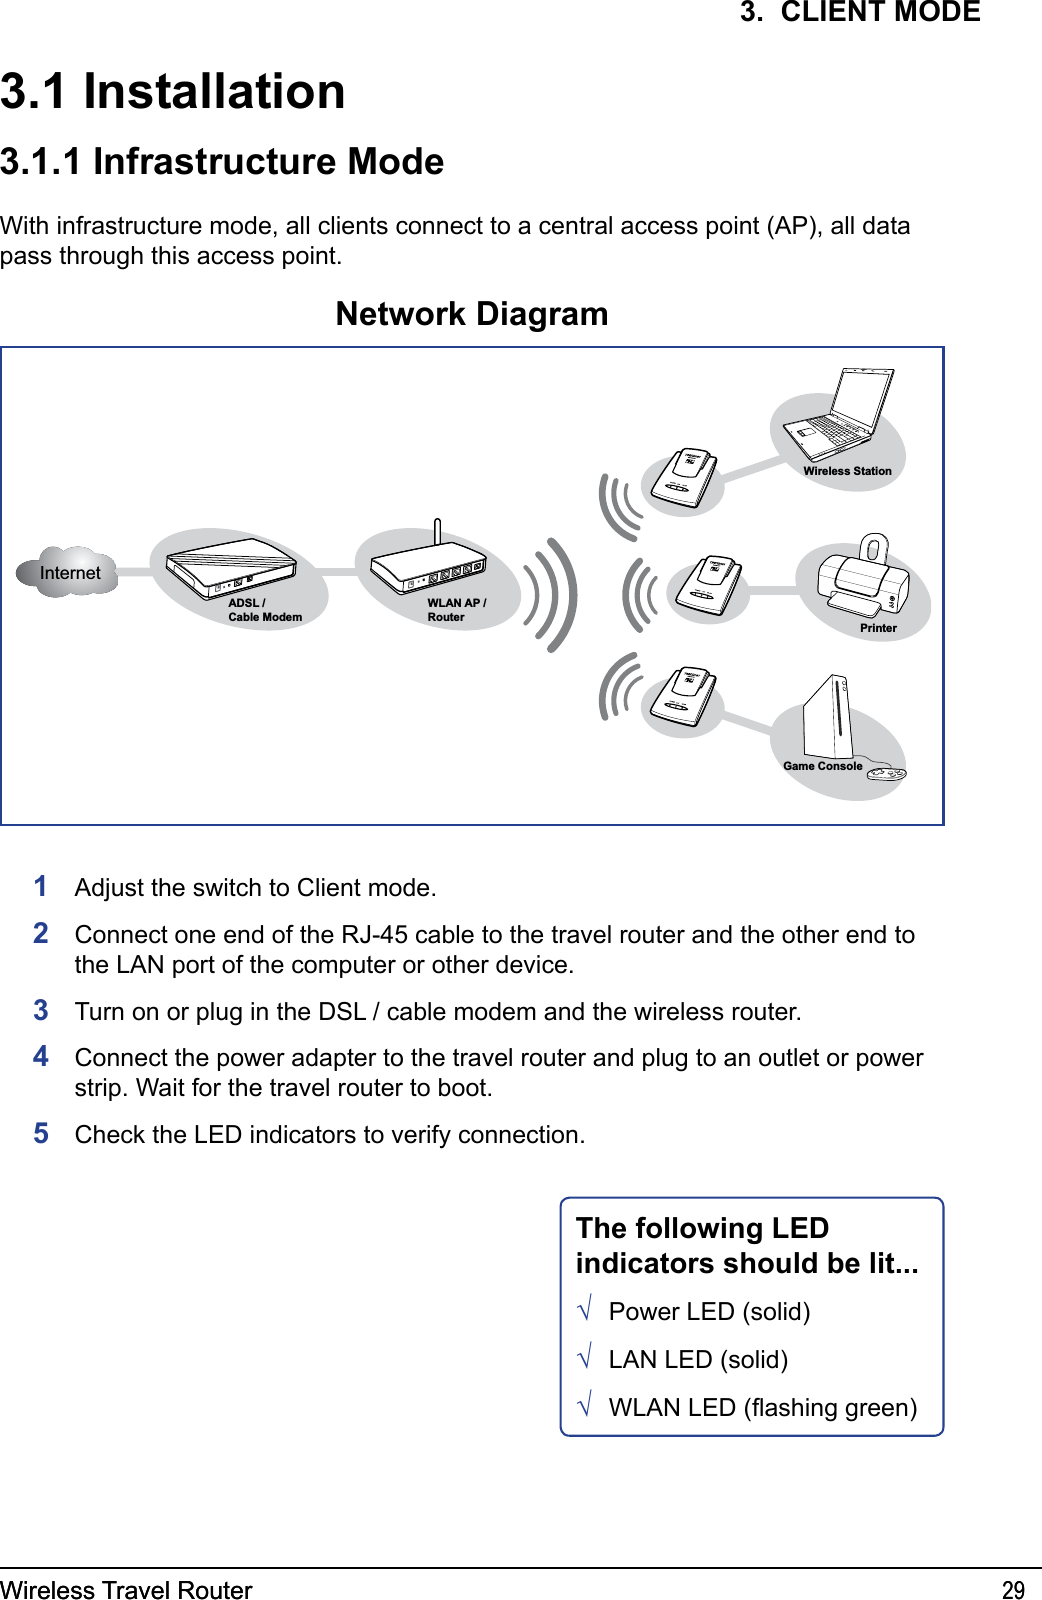 Wireless Travel Router 29Wireless Travel Router 293.  CLIENT MODE3.1 InstallationInternetADSL /Cable ModemWLAN AP /RouterWireless StationPrinterGame ConsoleNetwork DiagramThe following LED indicators should be lit...Power LED (solid)LAN LED (solid)WLAN LED (ashing green)√√√1  Adjust the switch to Client mode.2  Connect one end of the RJ-45 cable to the travel router and the other end to the LAN port of the computer or other device.3  Turn on or plug in the DSL / cable modem and the wireless router.4   Connect the power adapter to the travel router and plug to an outlet or power strip. Wait for the travel router to boot.5  Check the LED indicators to verify connection.3.1.1 Infrastructure ModeWith infrastructure mode, all clients connect to a central access point (AP), all data pass through this access point.